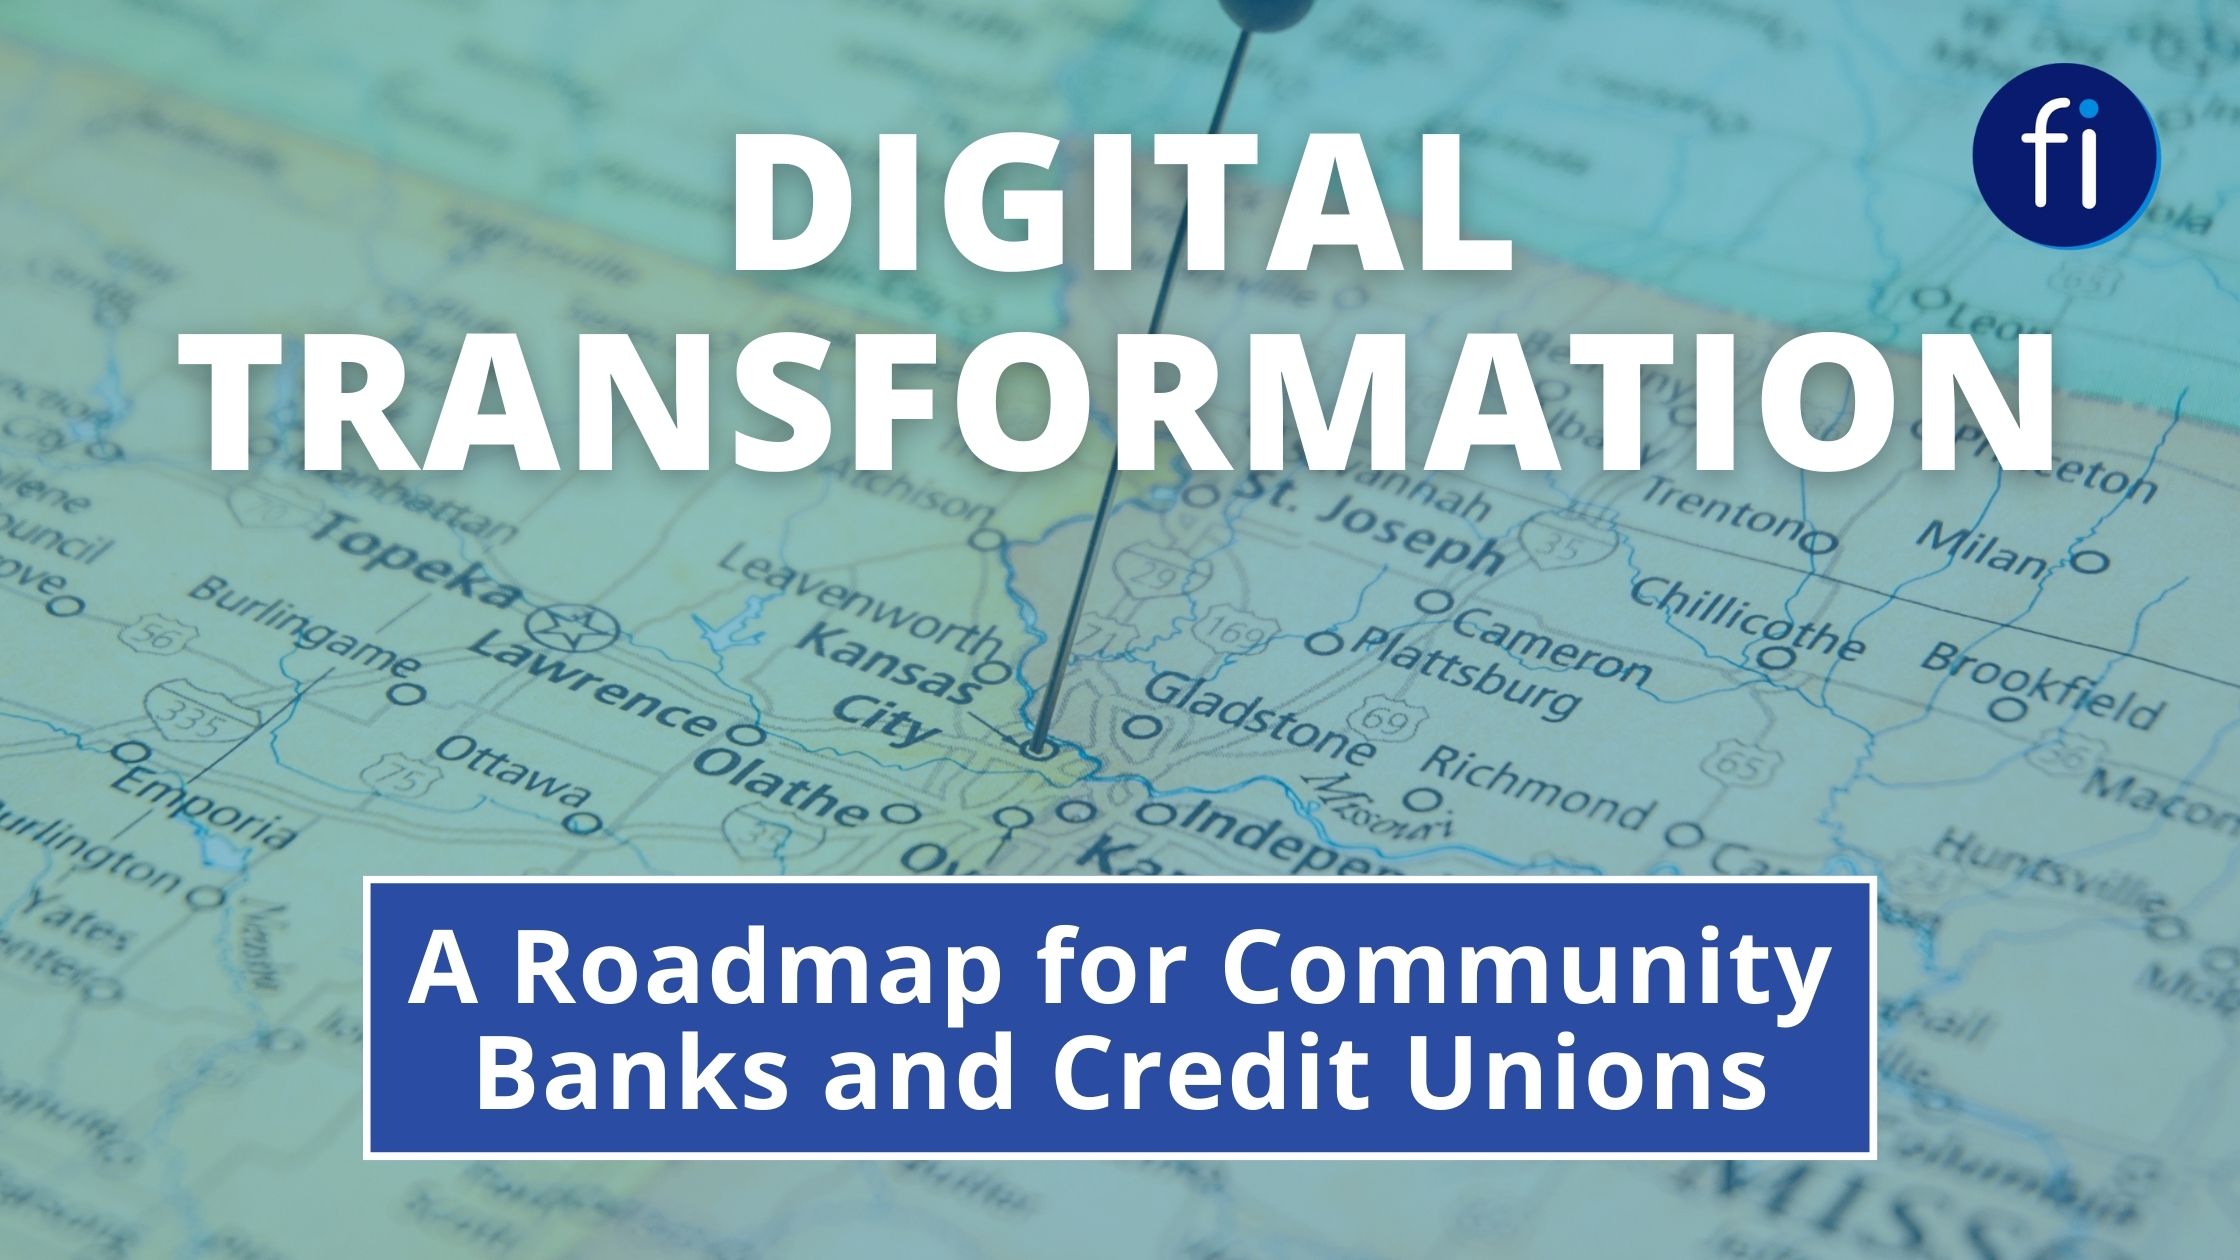 Digital Transformation: A Roadmap for Community Banks and Credit Unions